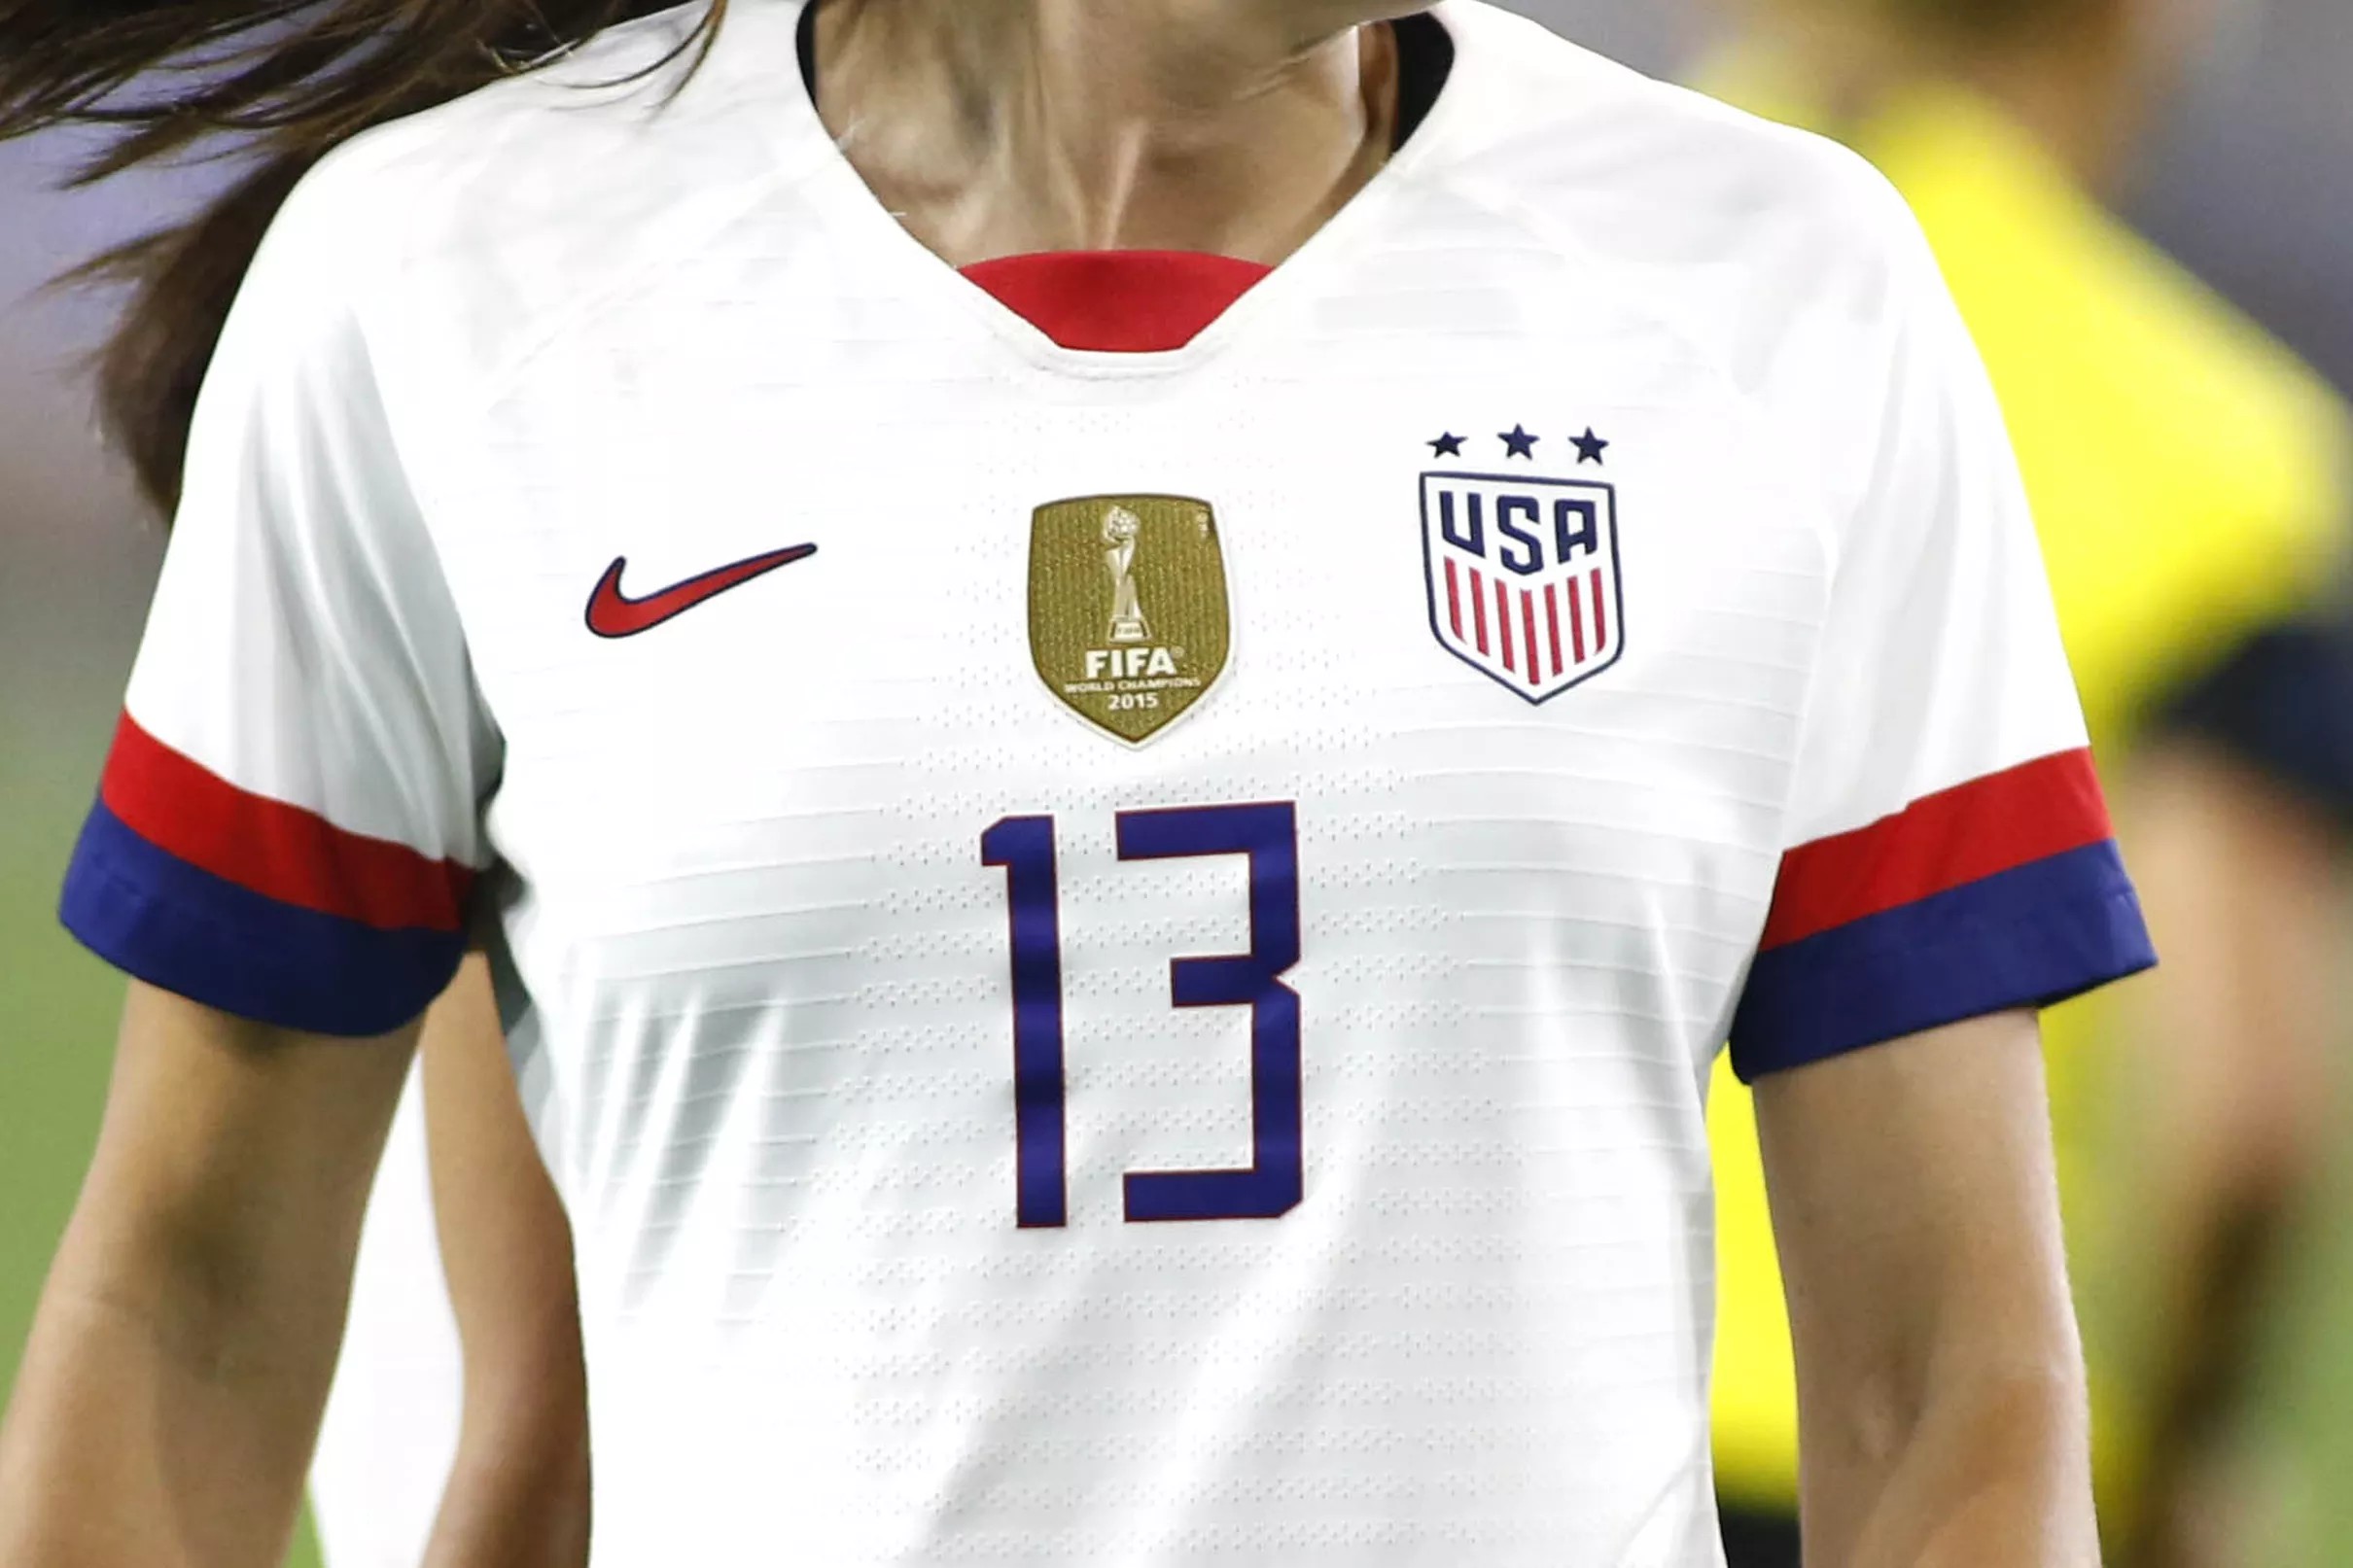 Show me the merch what’s going on with the USWNT’s World Cup jersey sales?